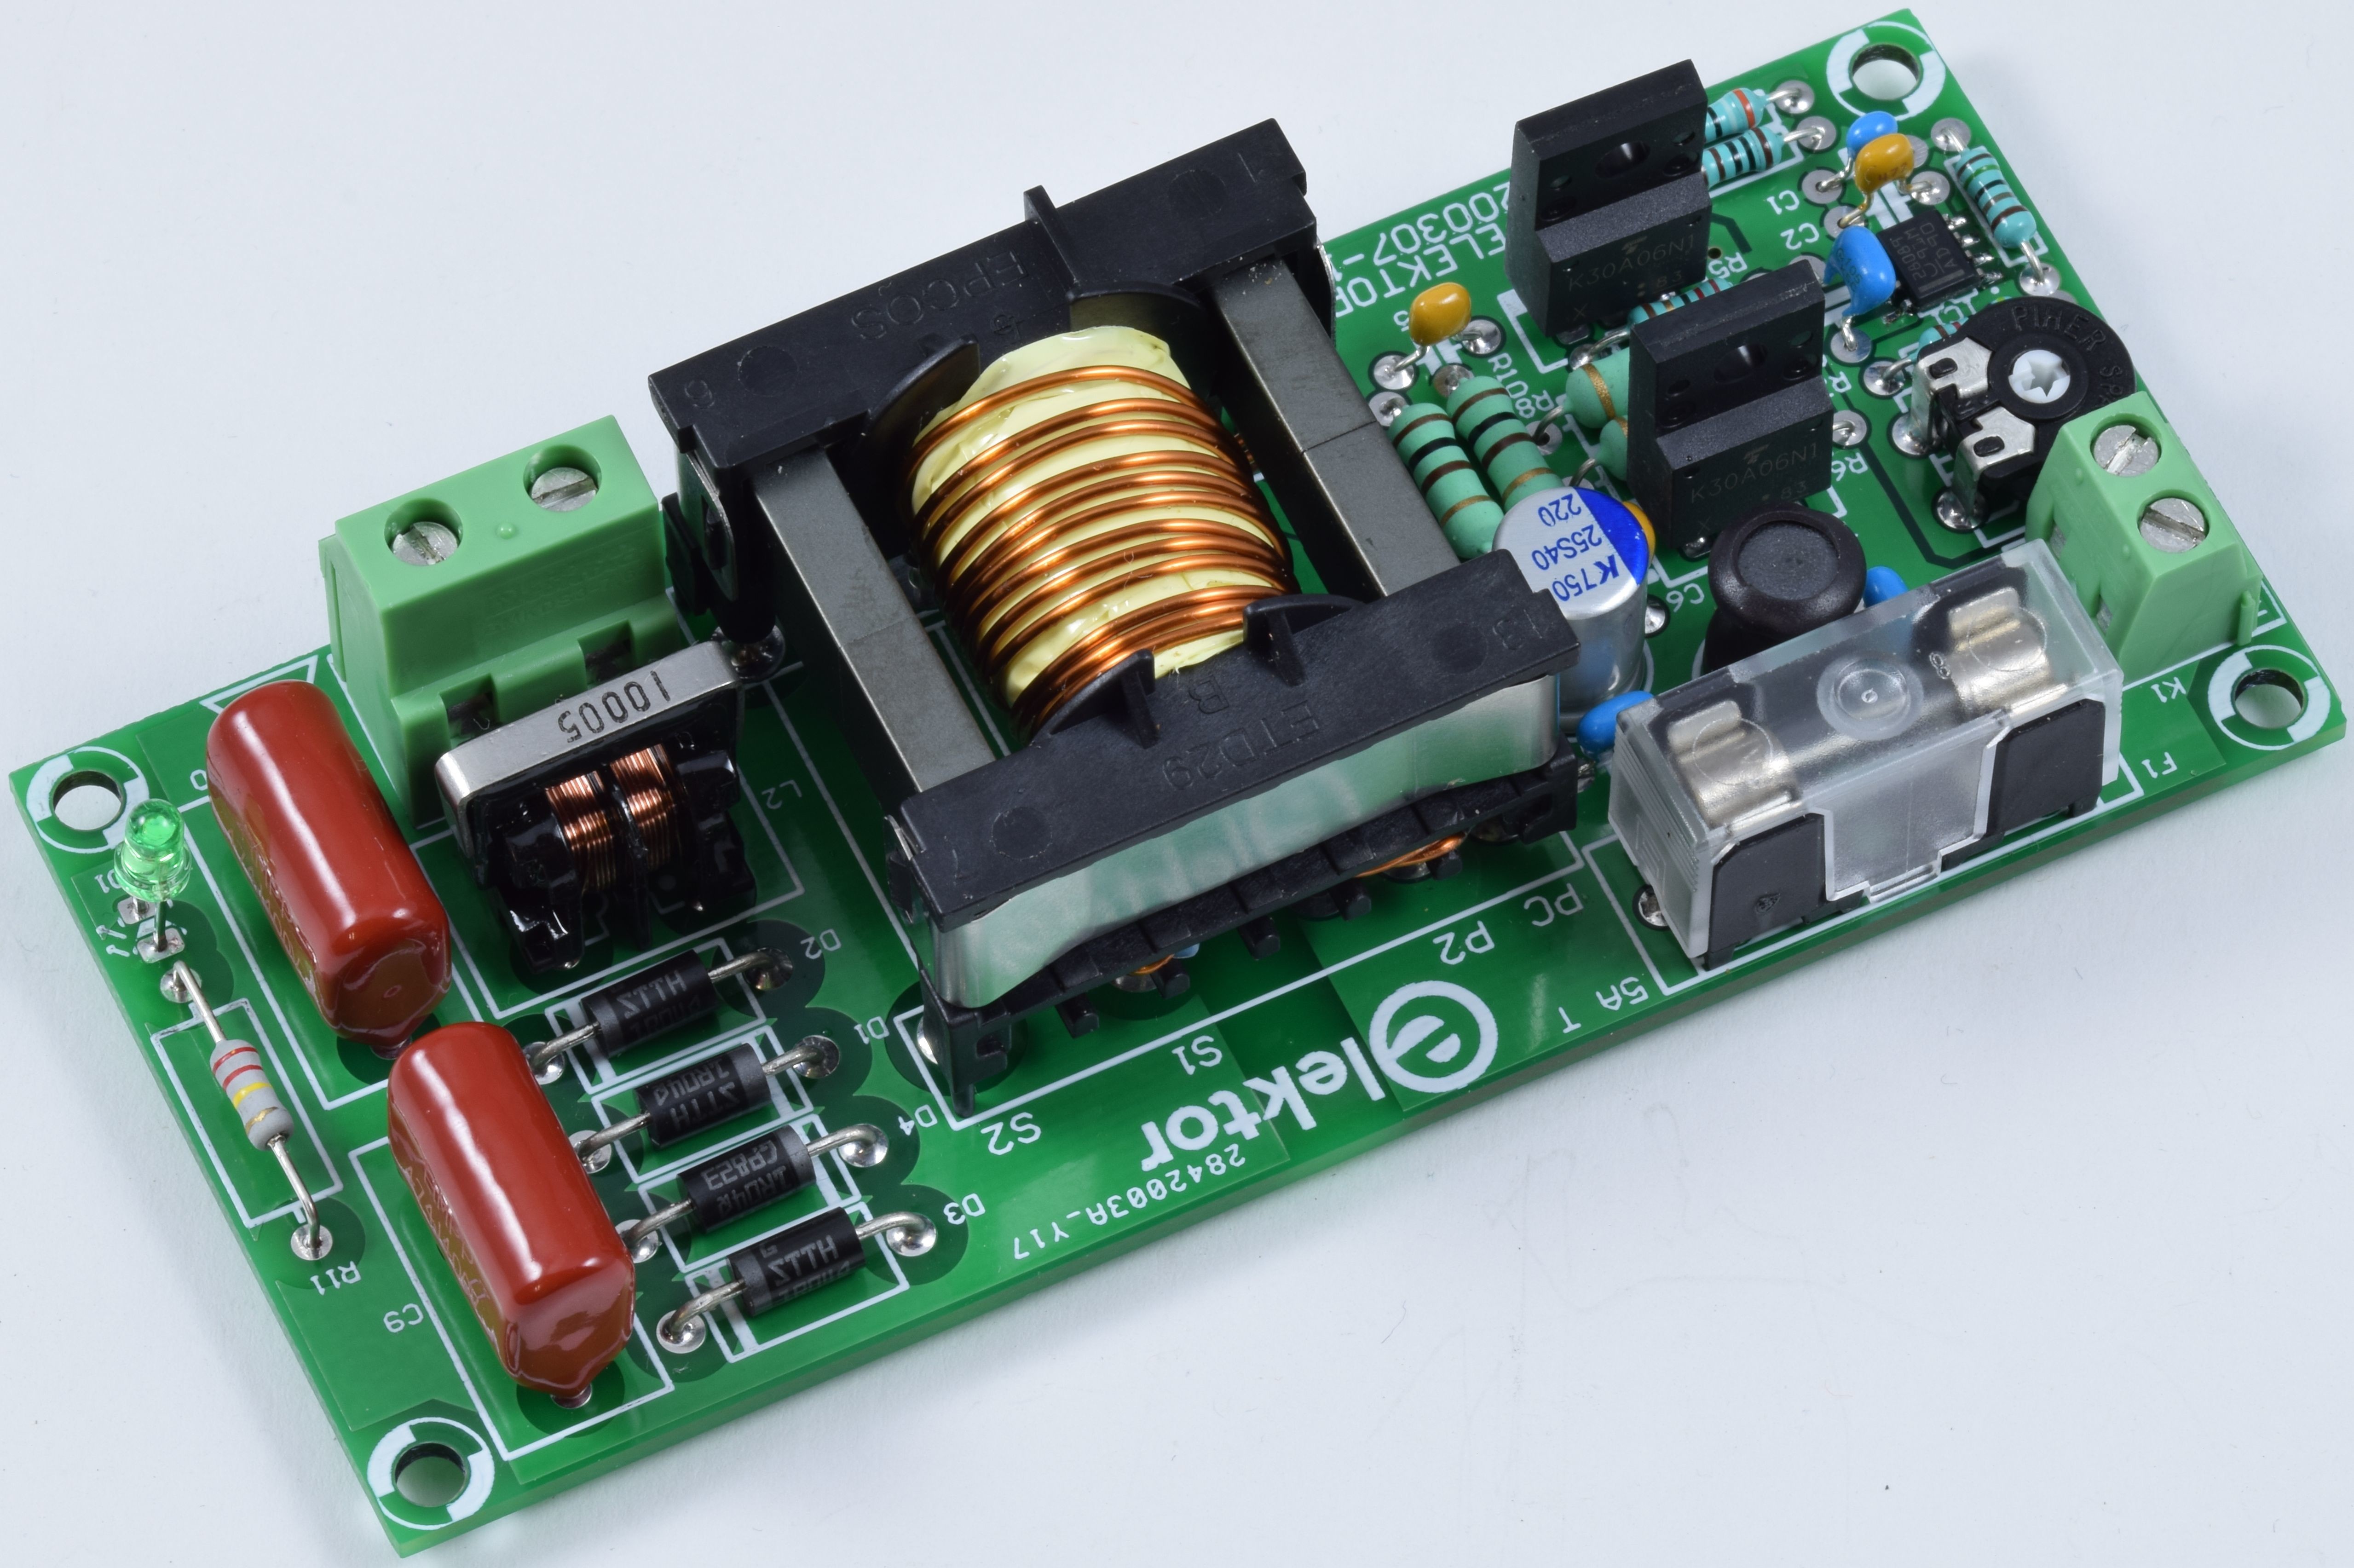 12-to-200-V DC/DC Converter for Valve Amplifiers